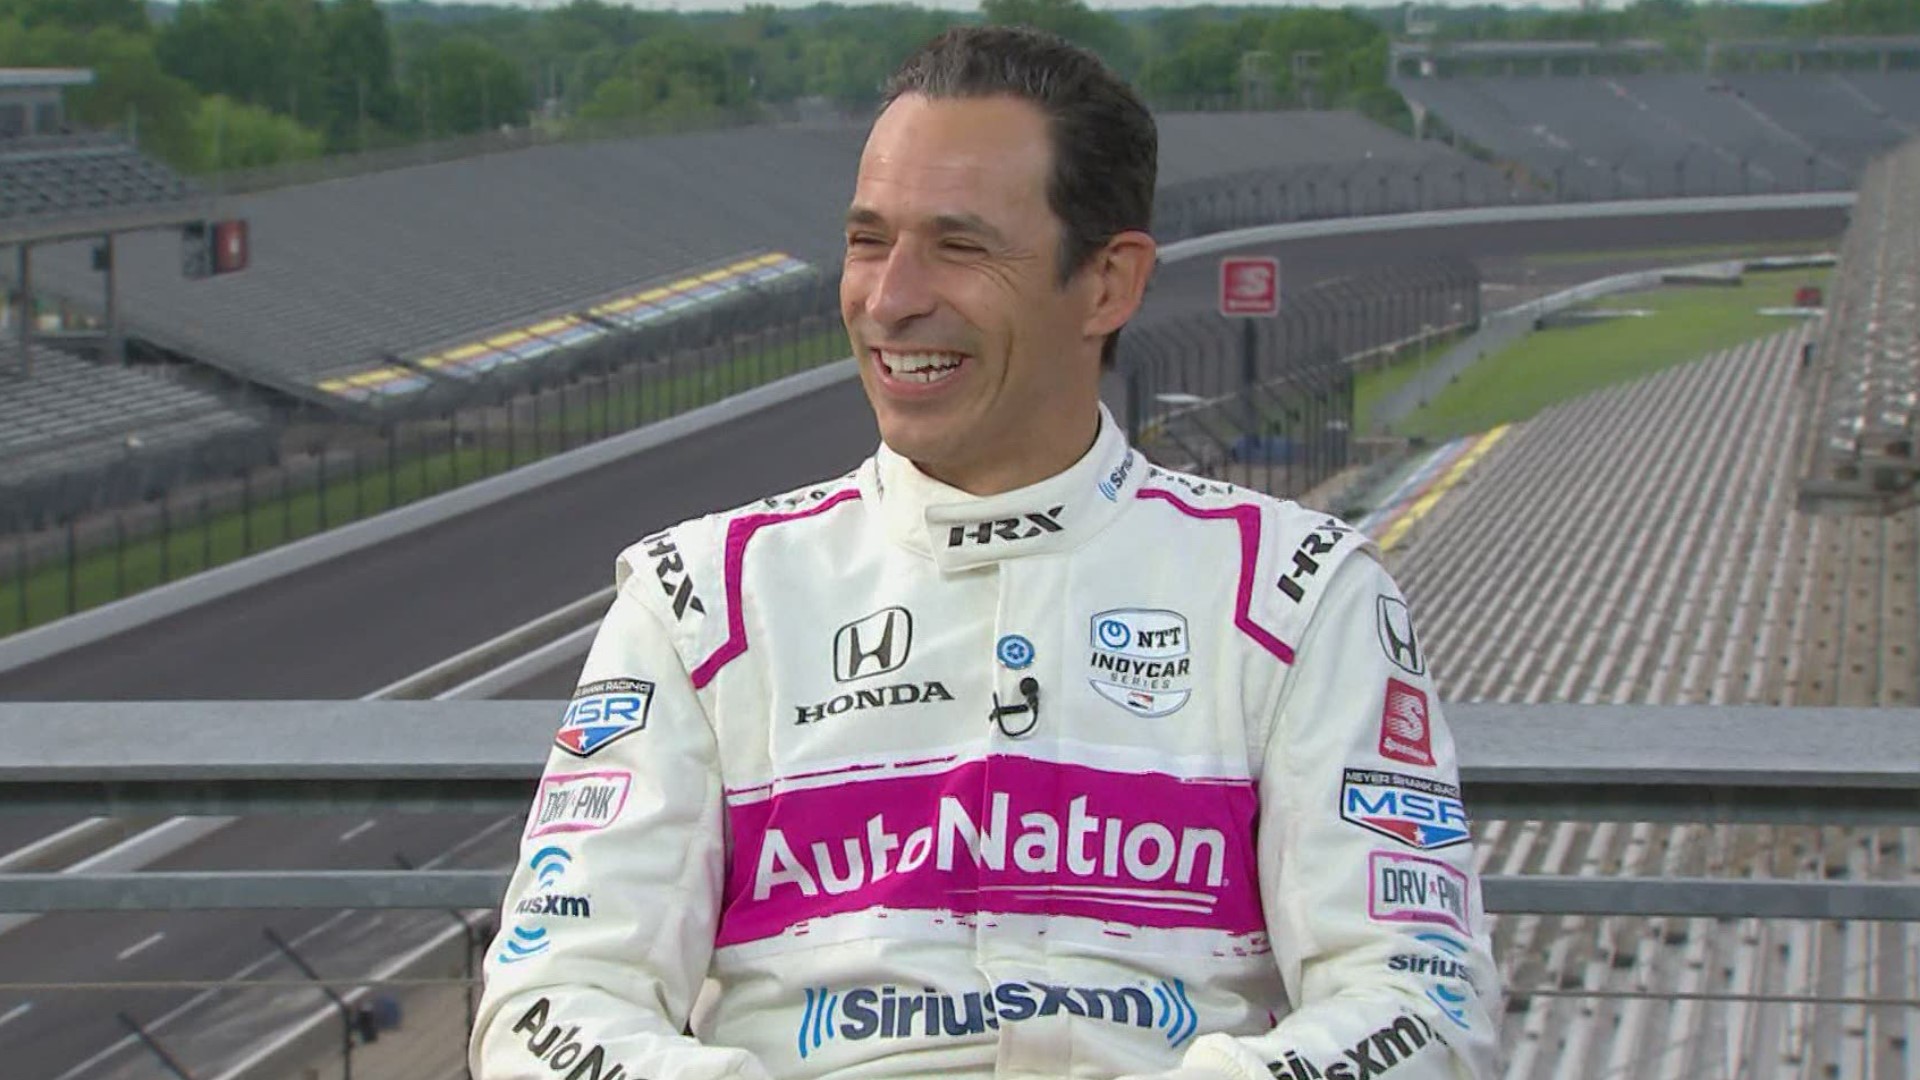 Helio Castroneves watched highlights of his record-tying fourth Indianapolis 500 win during the 500 Victory Special with Dave Calabro Monday night.